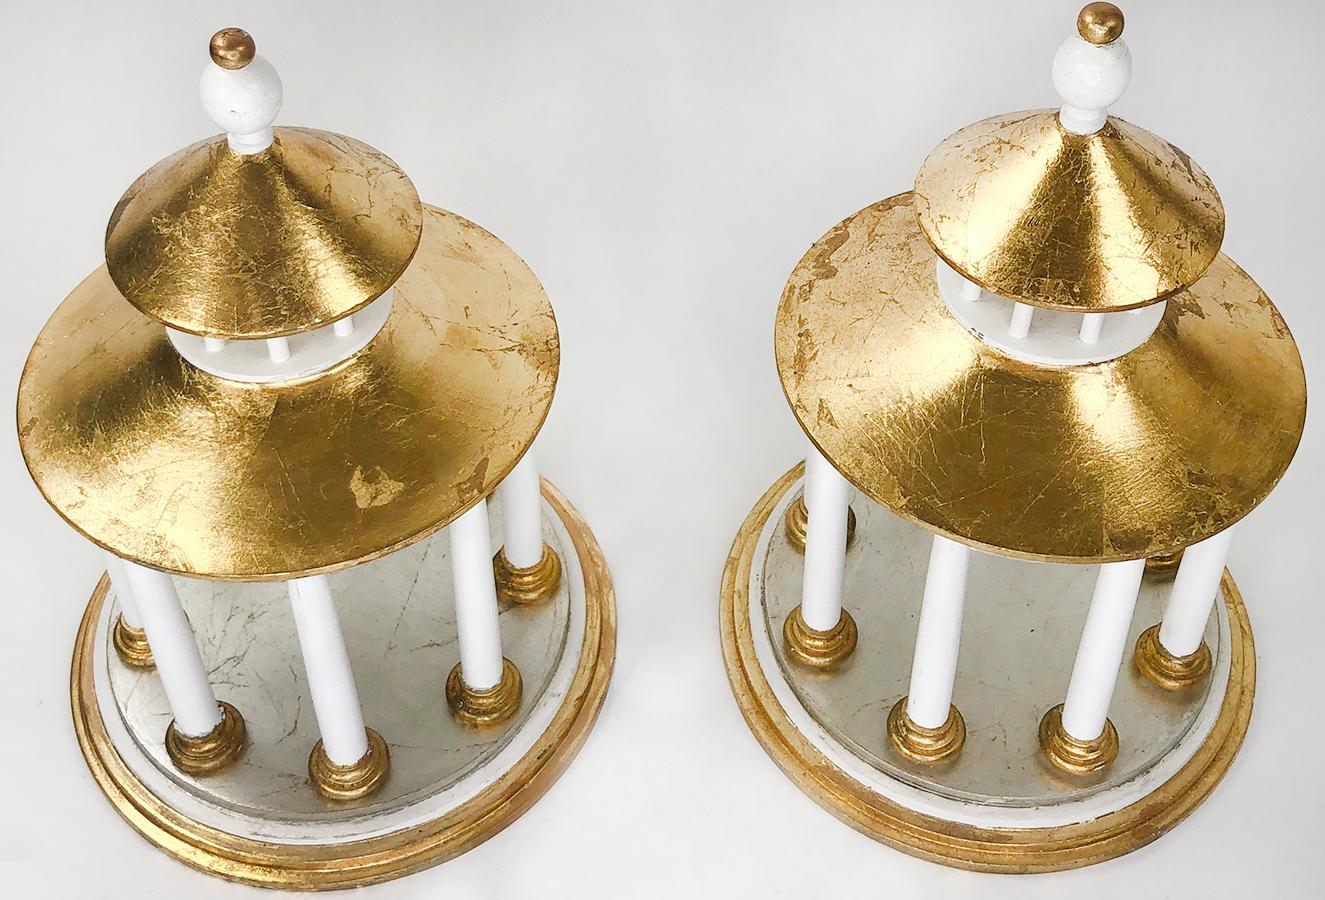 A pair of custom made hand-gilt classical pagoda models. Hand painted white columns and minor trim features. The roof, top, and lower floors of the model have a wonderful hand gilt sheen. In a couple different types of gold. Originally created for